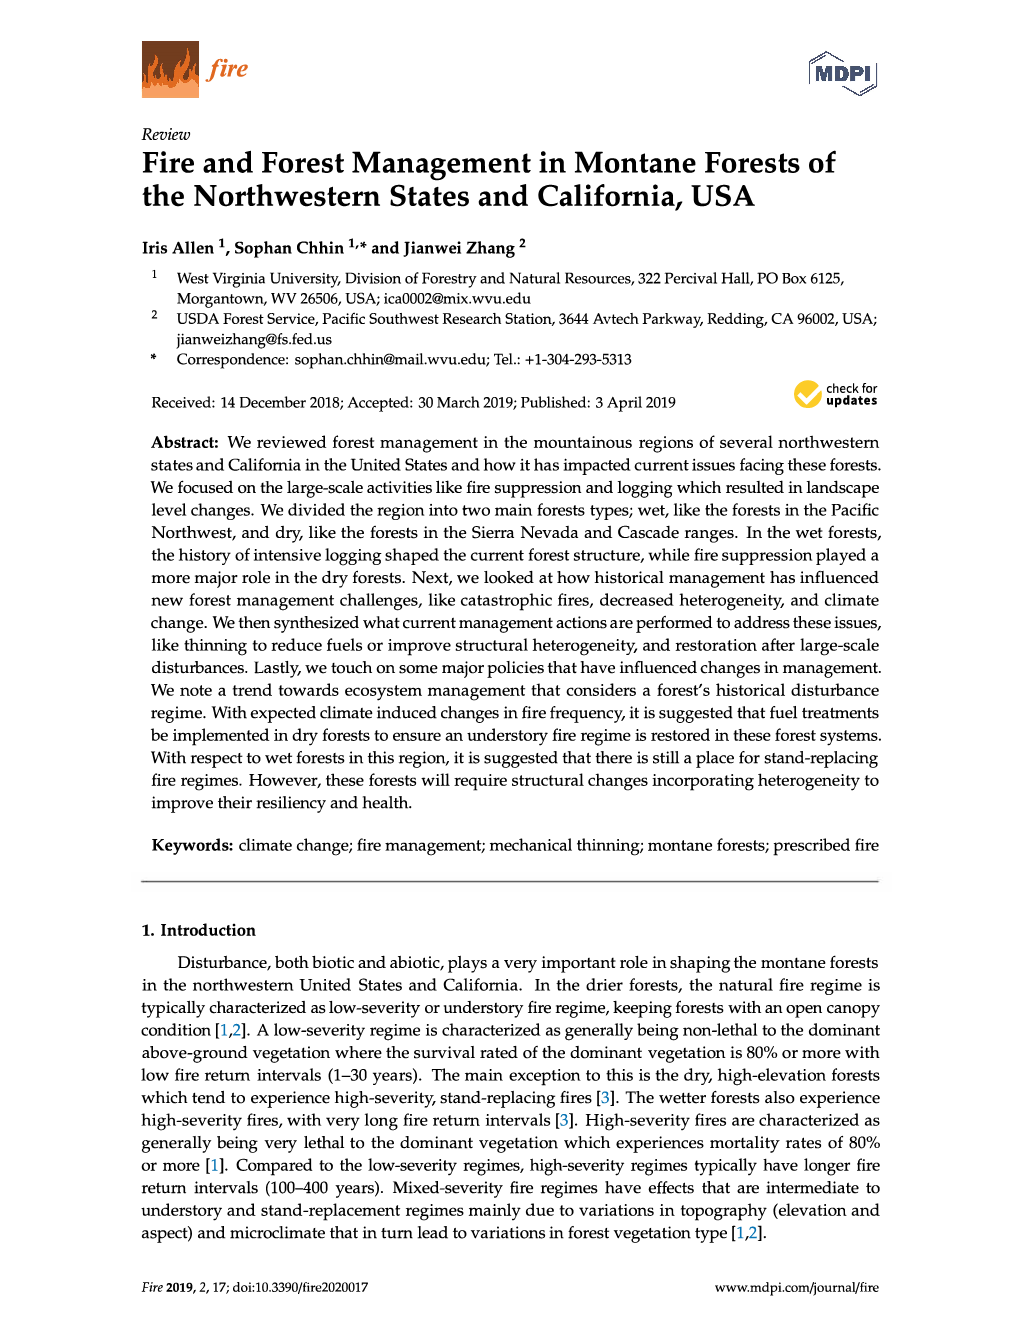 Fire and Forest Management in Montane Forests of the Northwestern States and California, USA